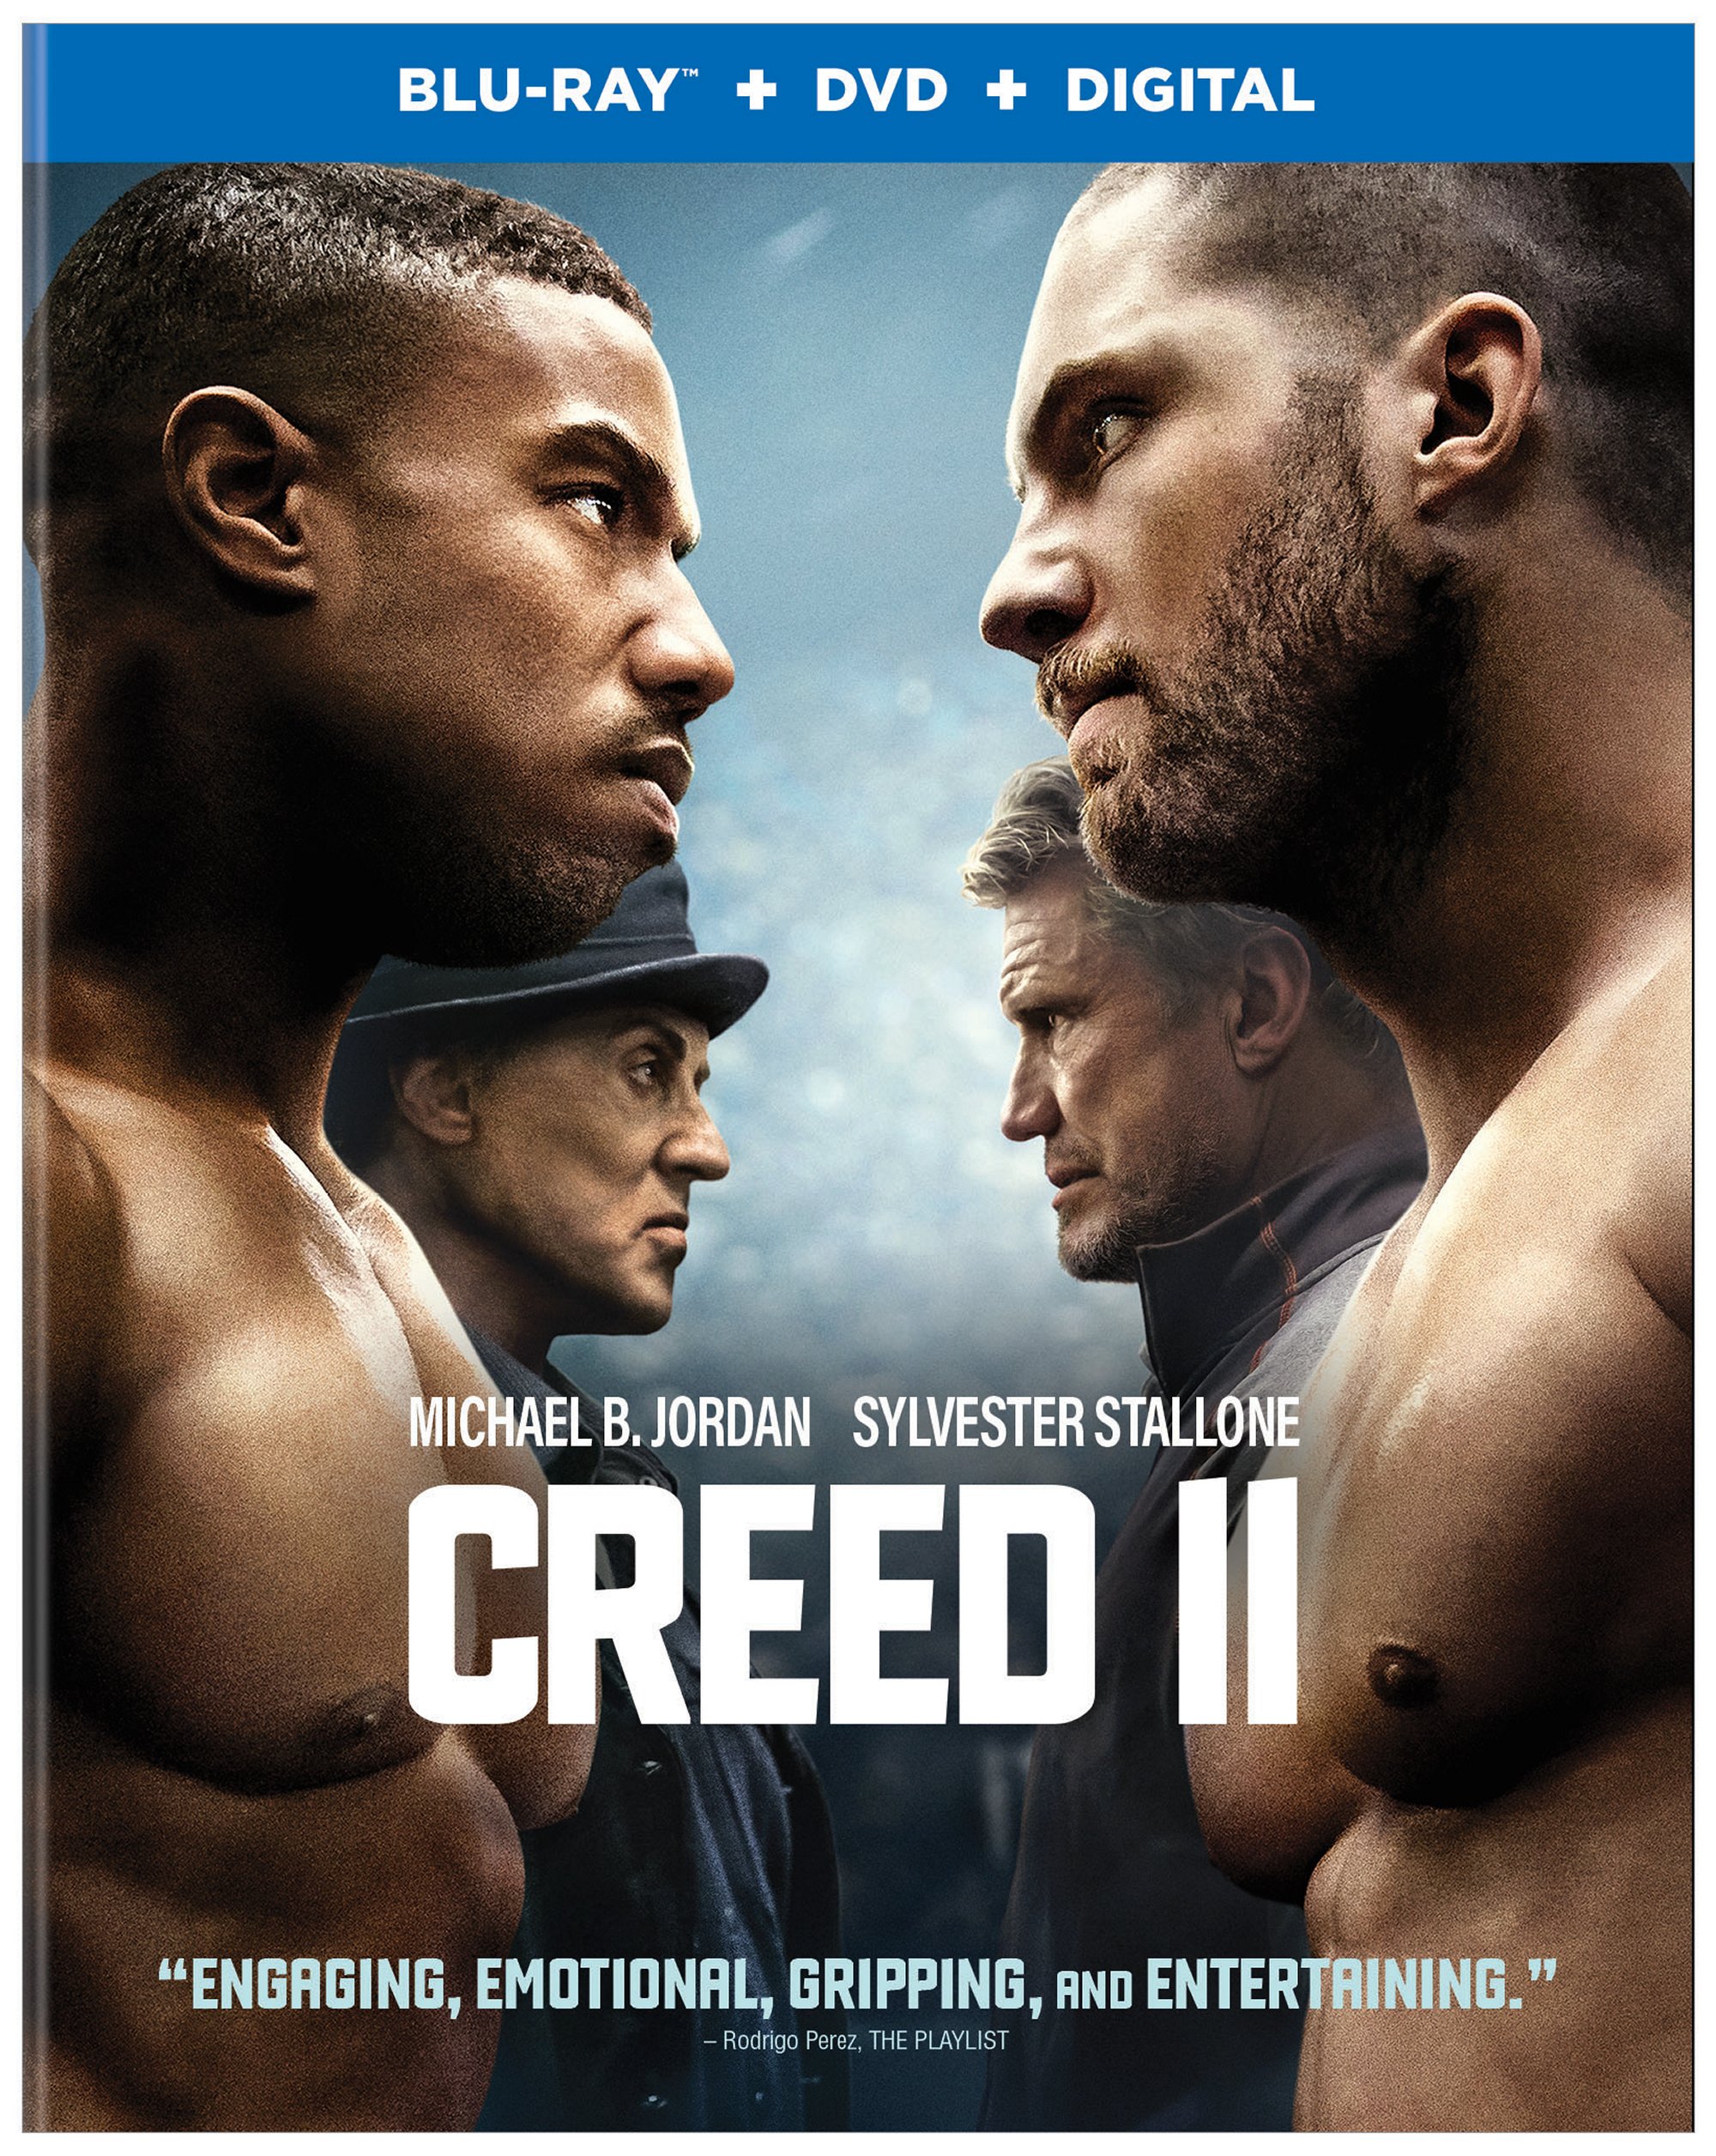 Creed 2 Blu-Ray Combo Pack cover (Warner Bros. Home Entertainment)